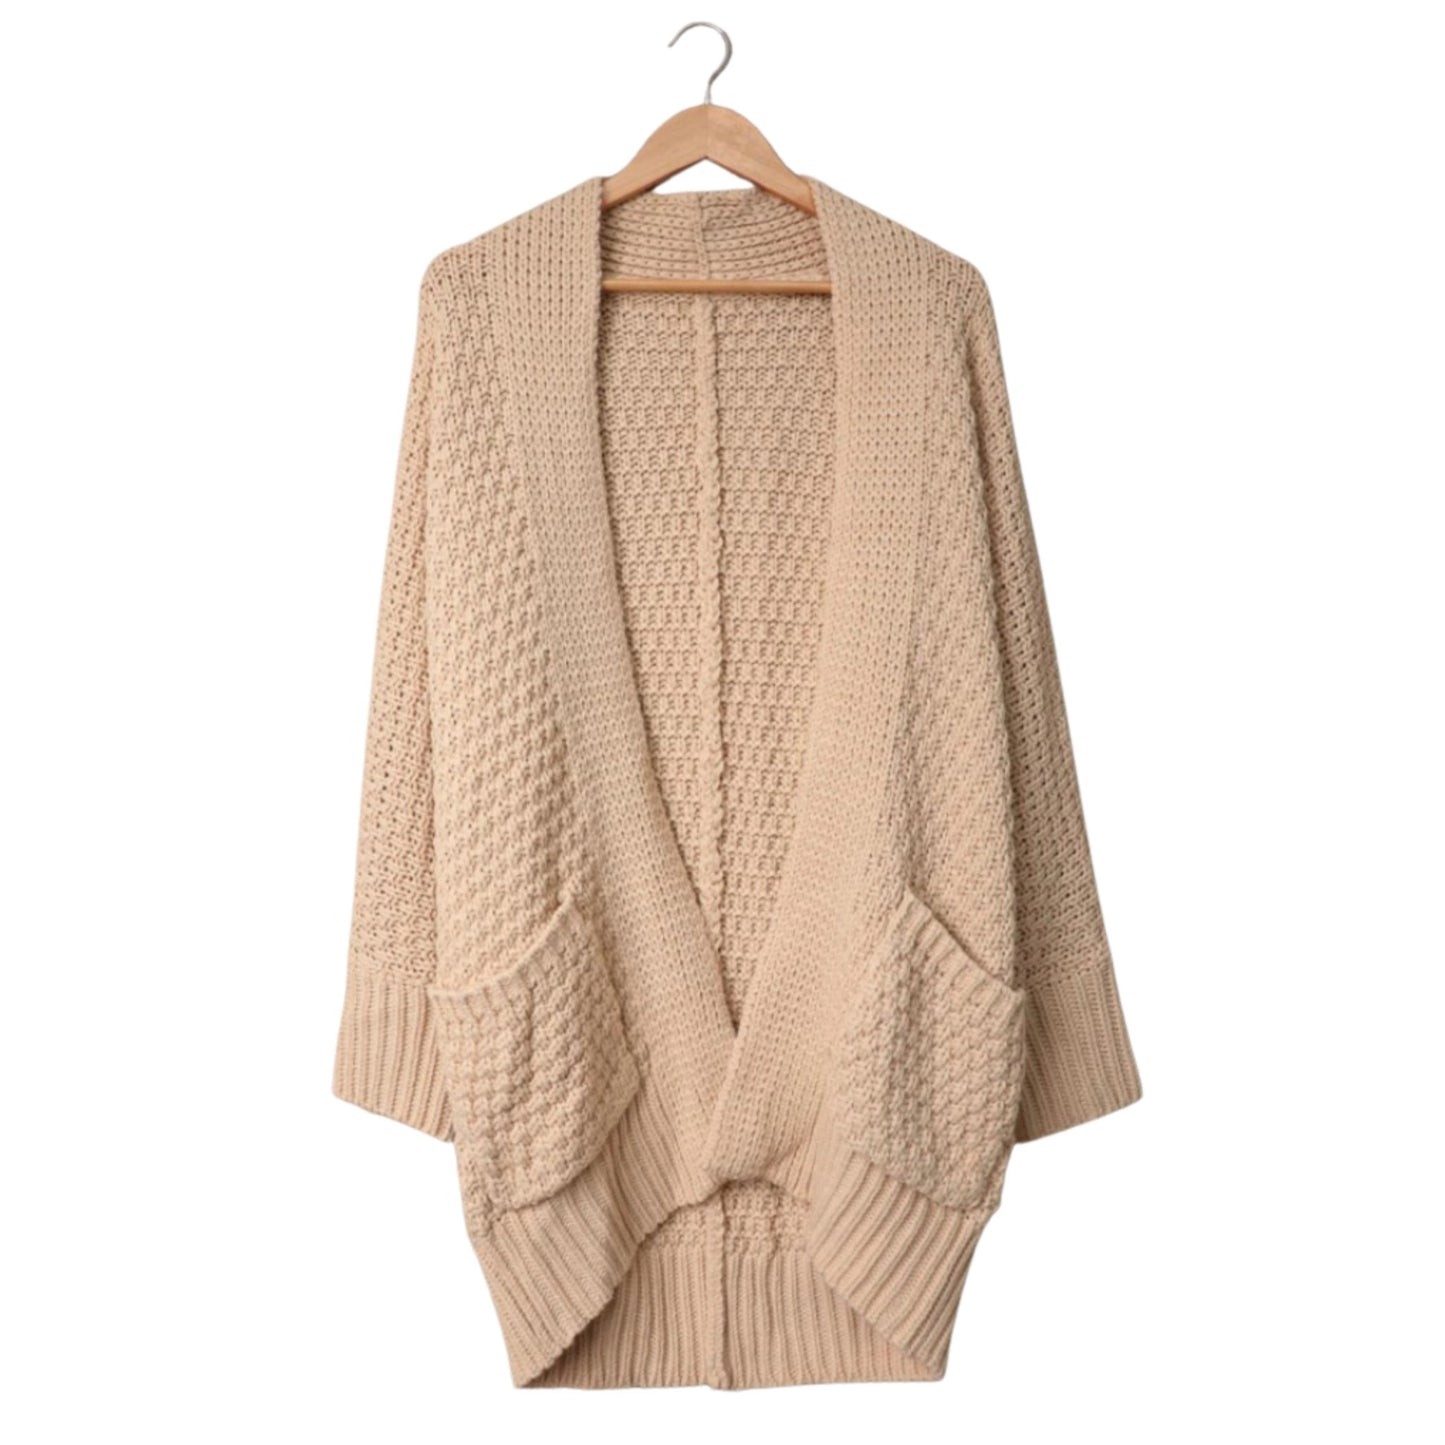 Khaki open front pocket casual knitted cardigan 